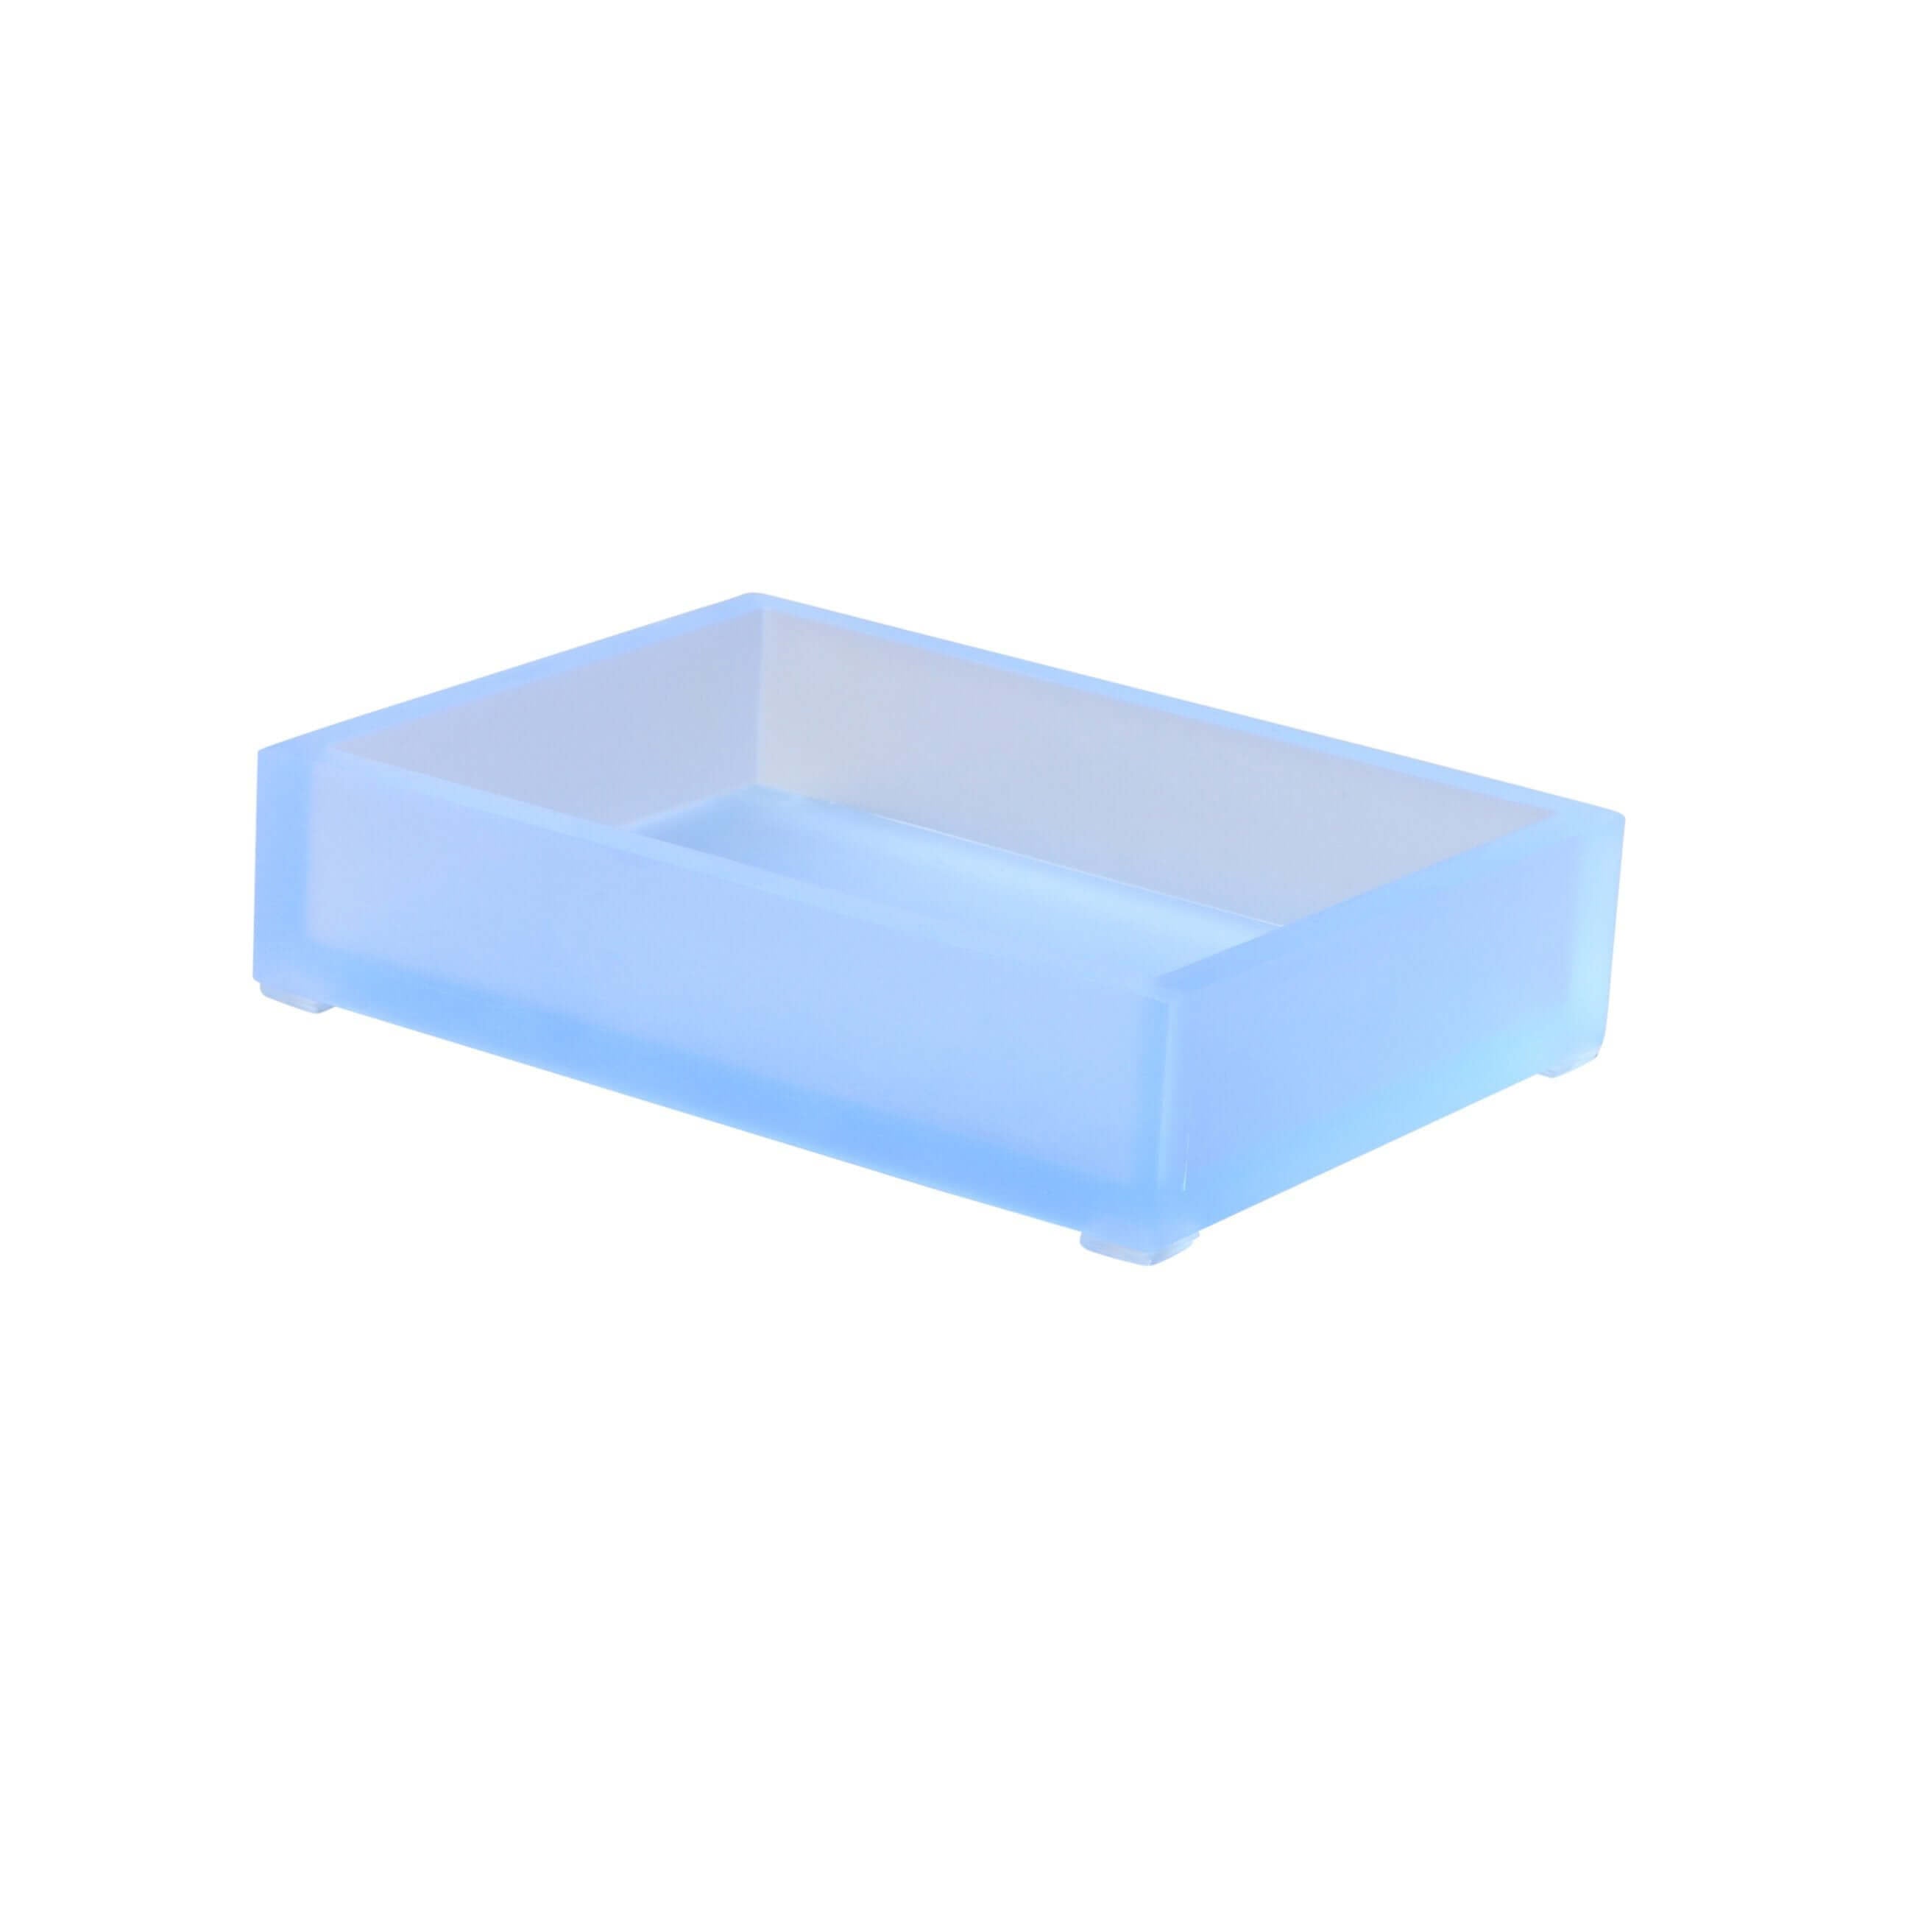 Mike + Ally - Ice Frosted Sky Soap Dish - 31431 - Blue - 